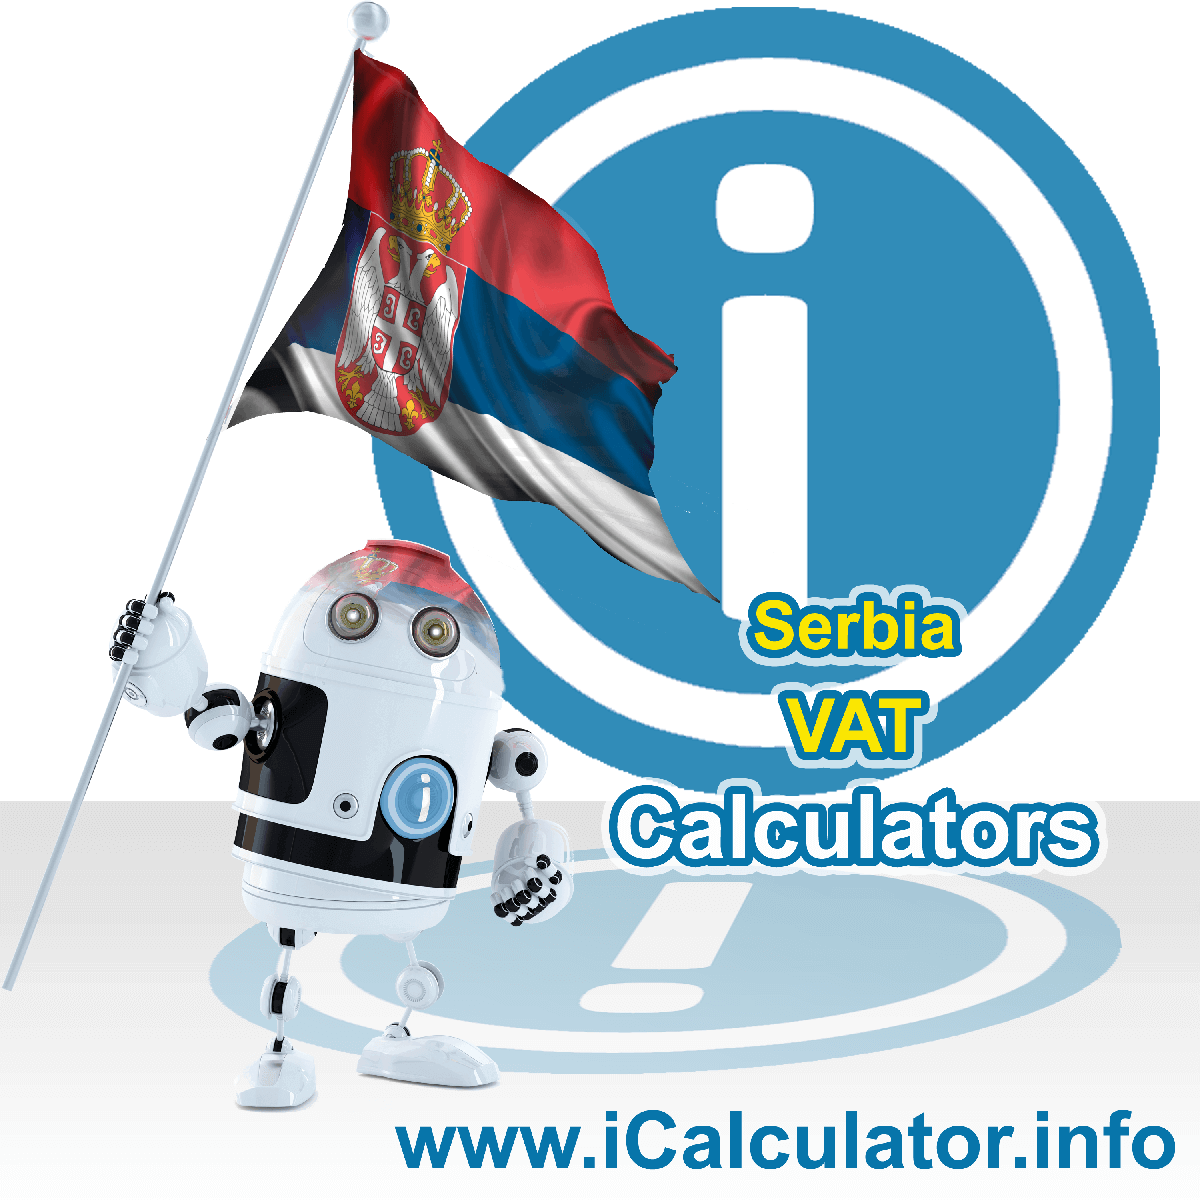 Serbia VAT Calculator. This image shows the Serbia flag and information relating to the VAT formula used for calculating Value Added Tax in Serbia using the Serbia VAT Calculator in 2023